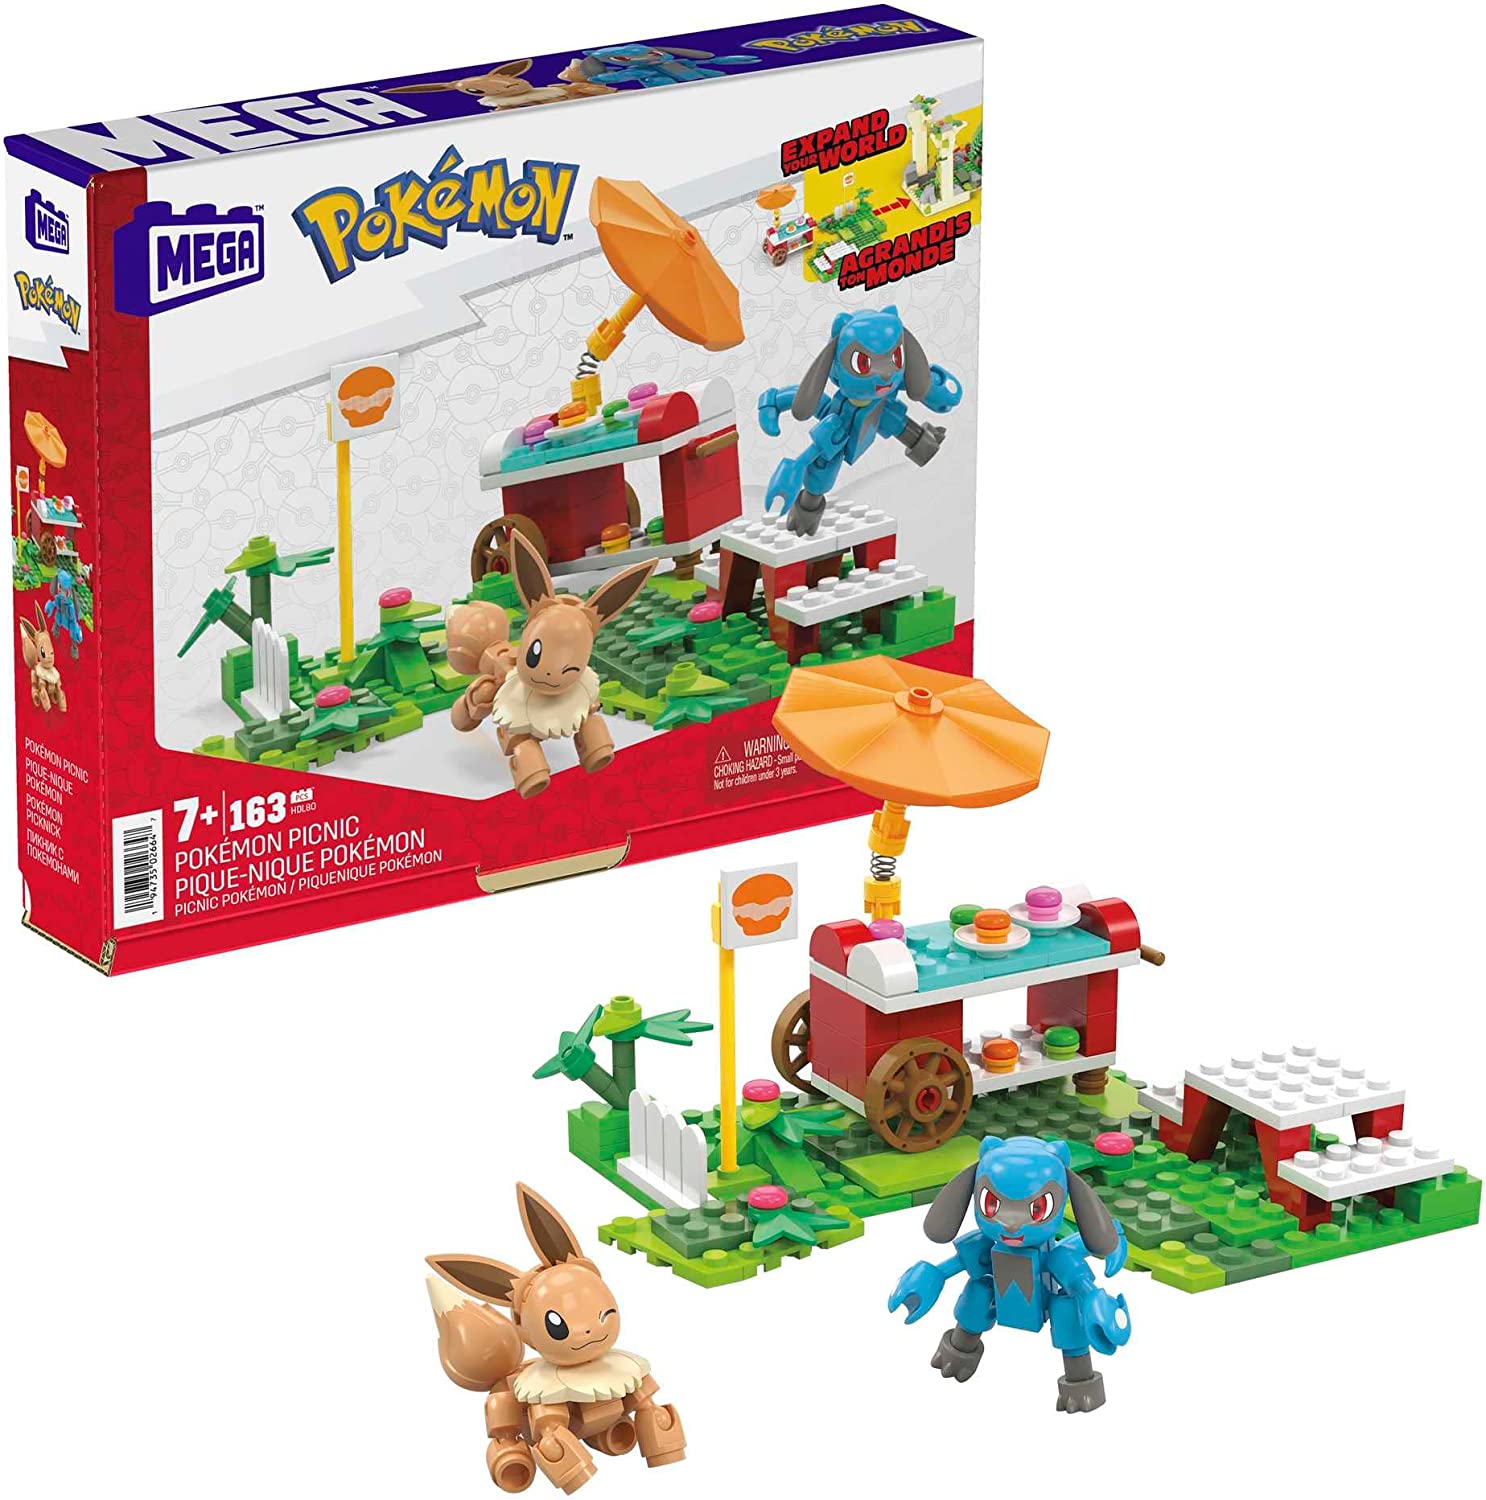 Mega Construx Pokemon Eevee Construction Set with character figures,  Building Toys for Kids (24 Pieces) 